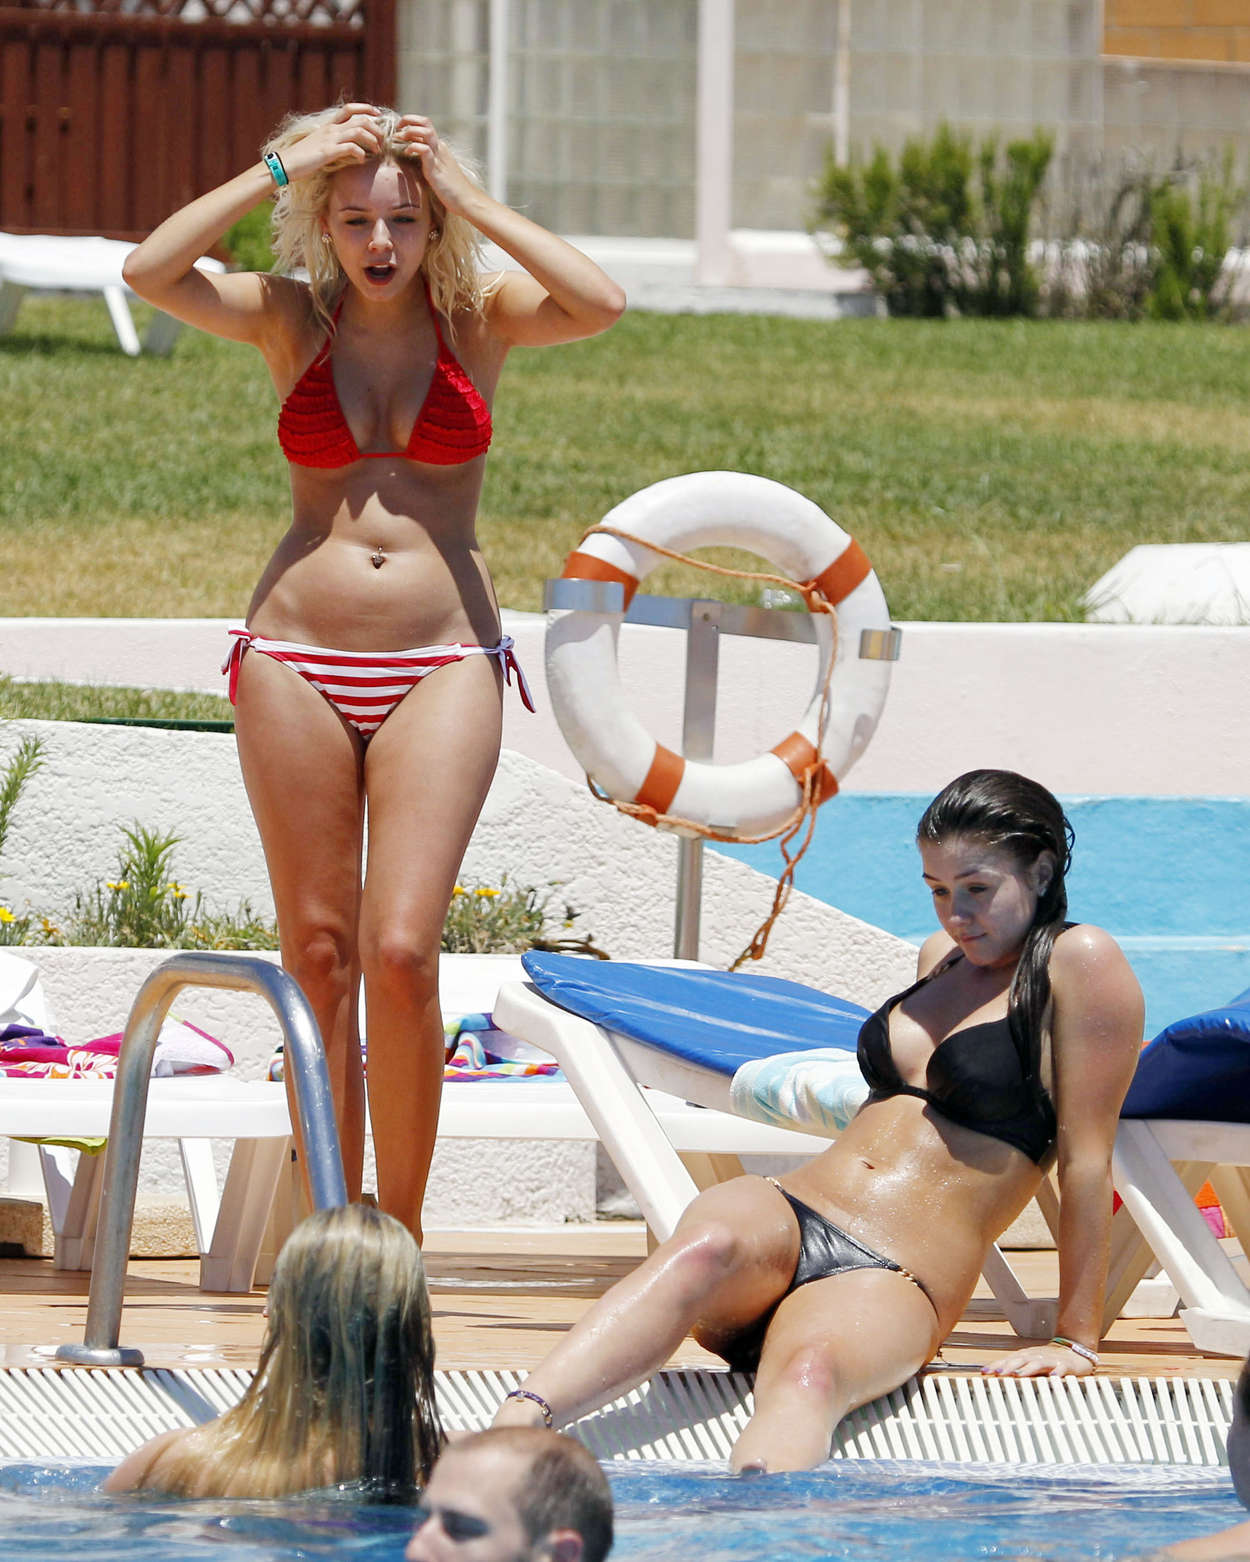 Sacha Parkinson and Brooke Vincent - Bikini poolside candids at a Hotel in ...